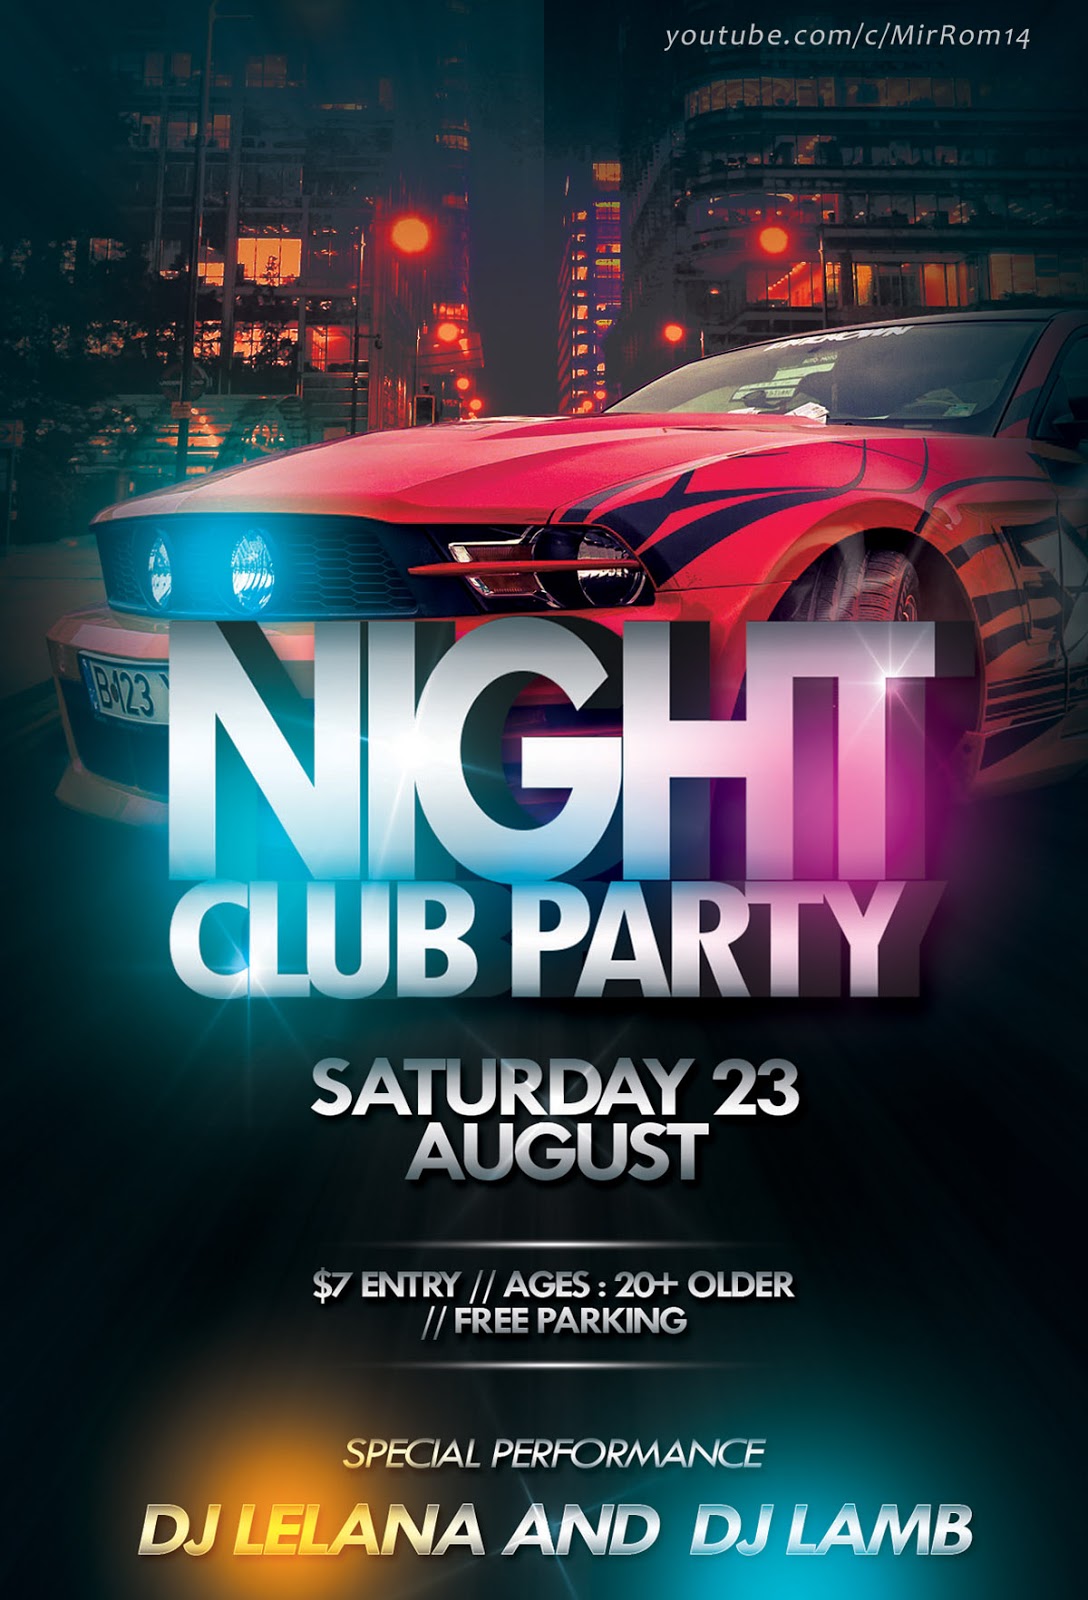 Create a Nightclub Party Flyer In Photoshop